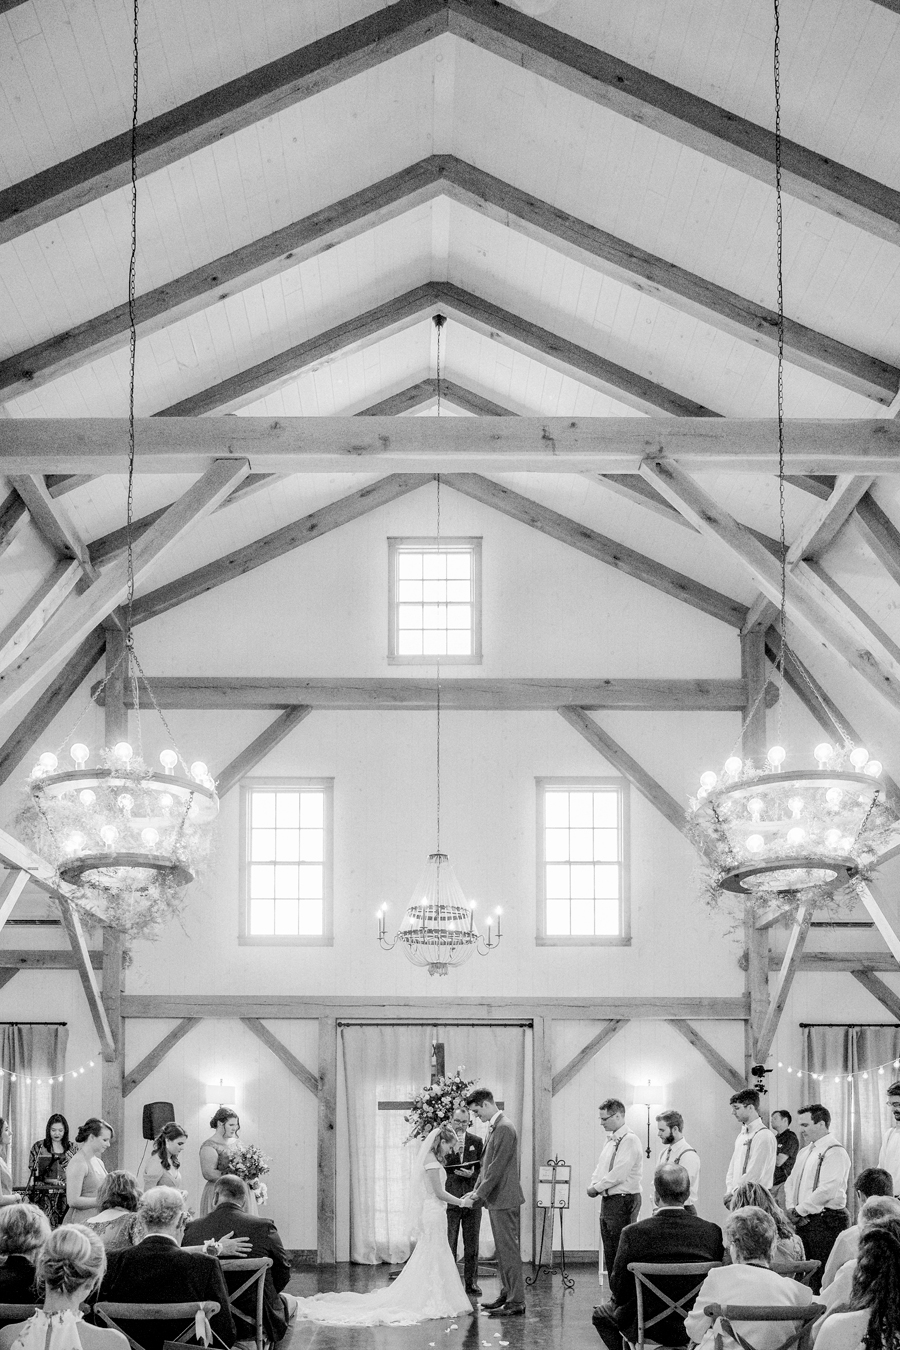 The inside of the barn during a ceremony at a Blue Bell Farm wedding by Love Tree Studios.